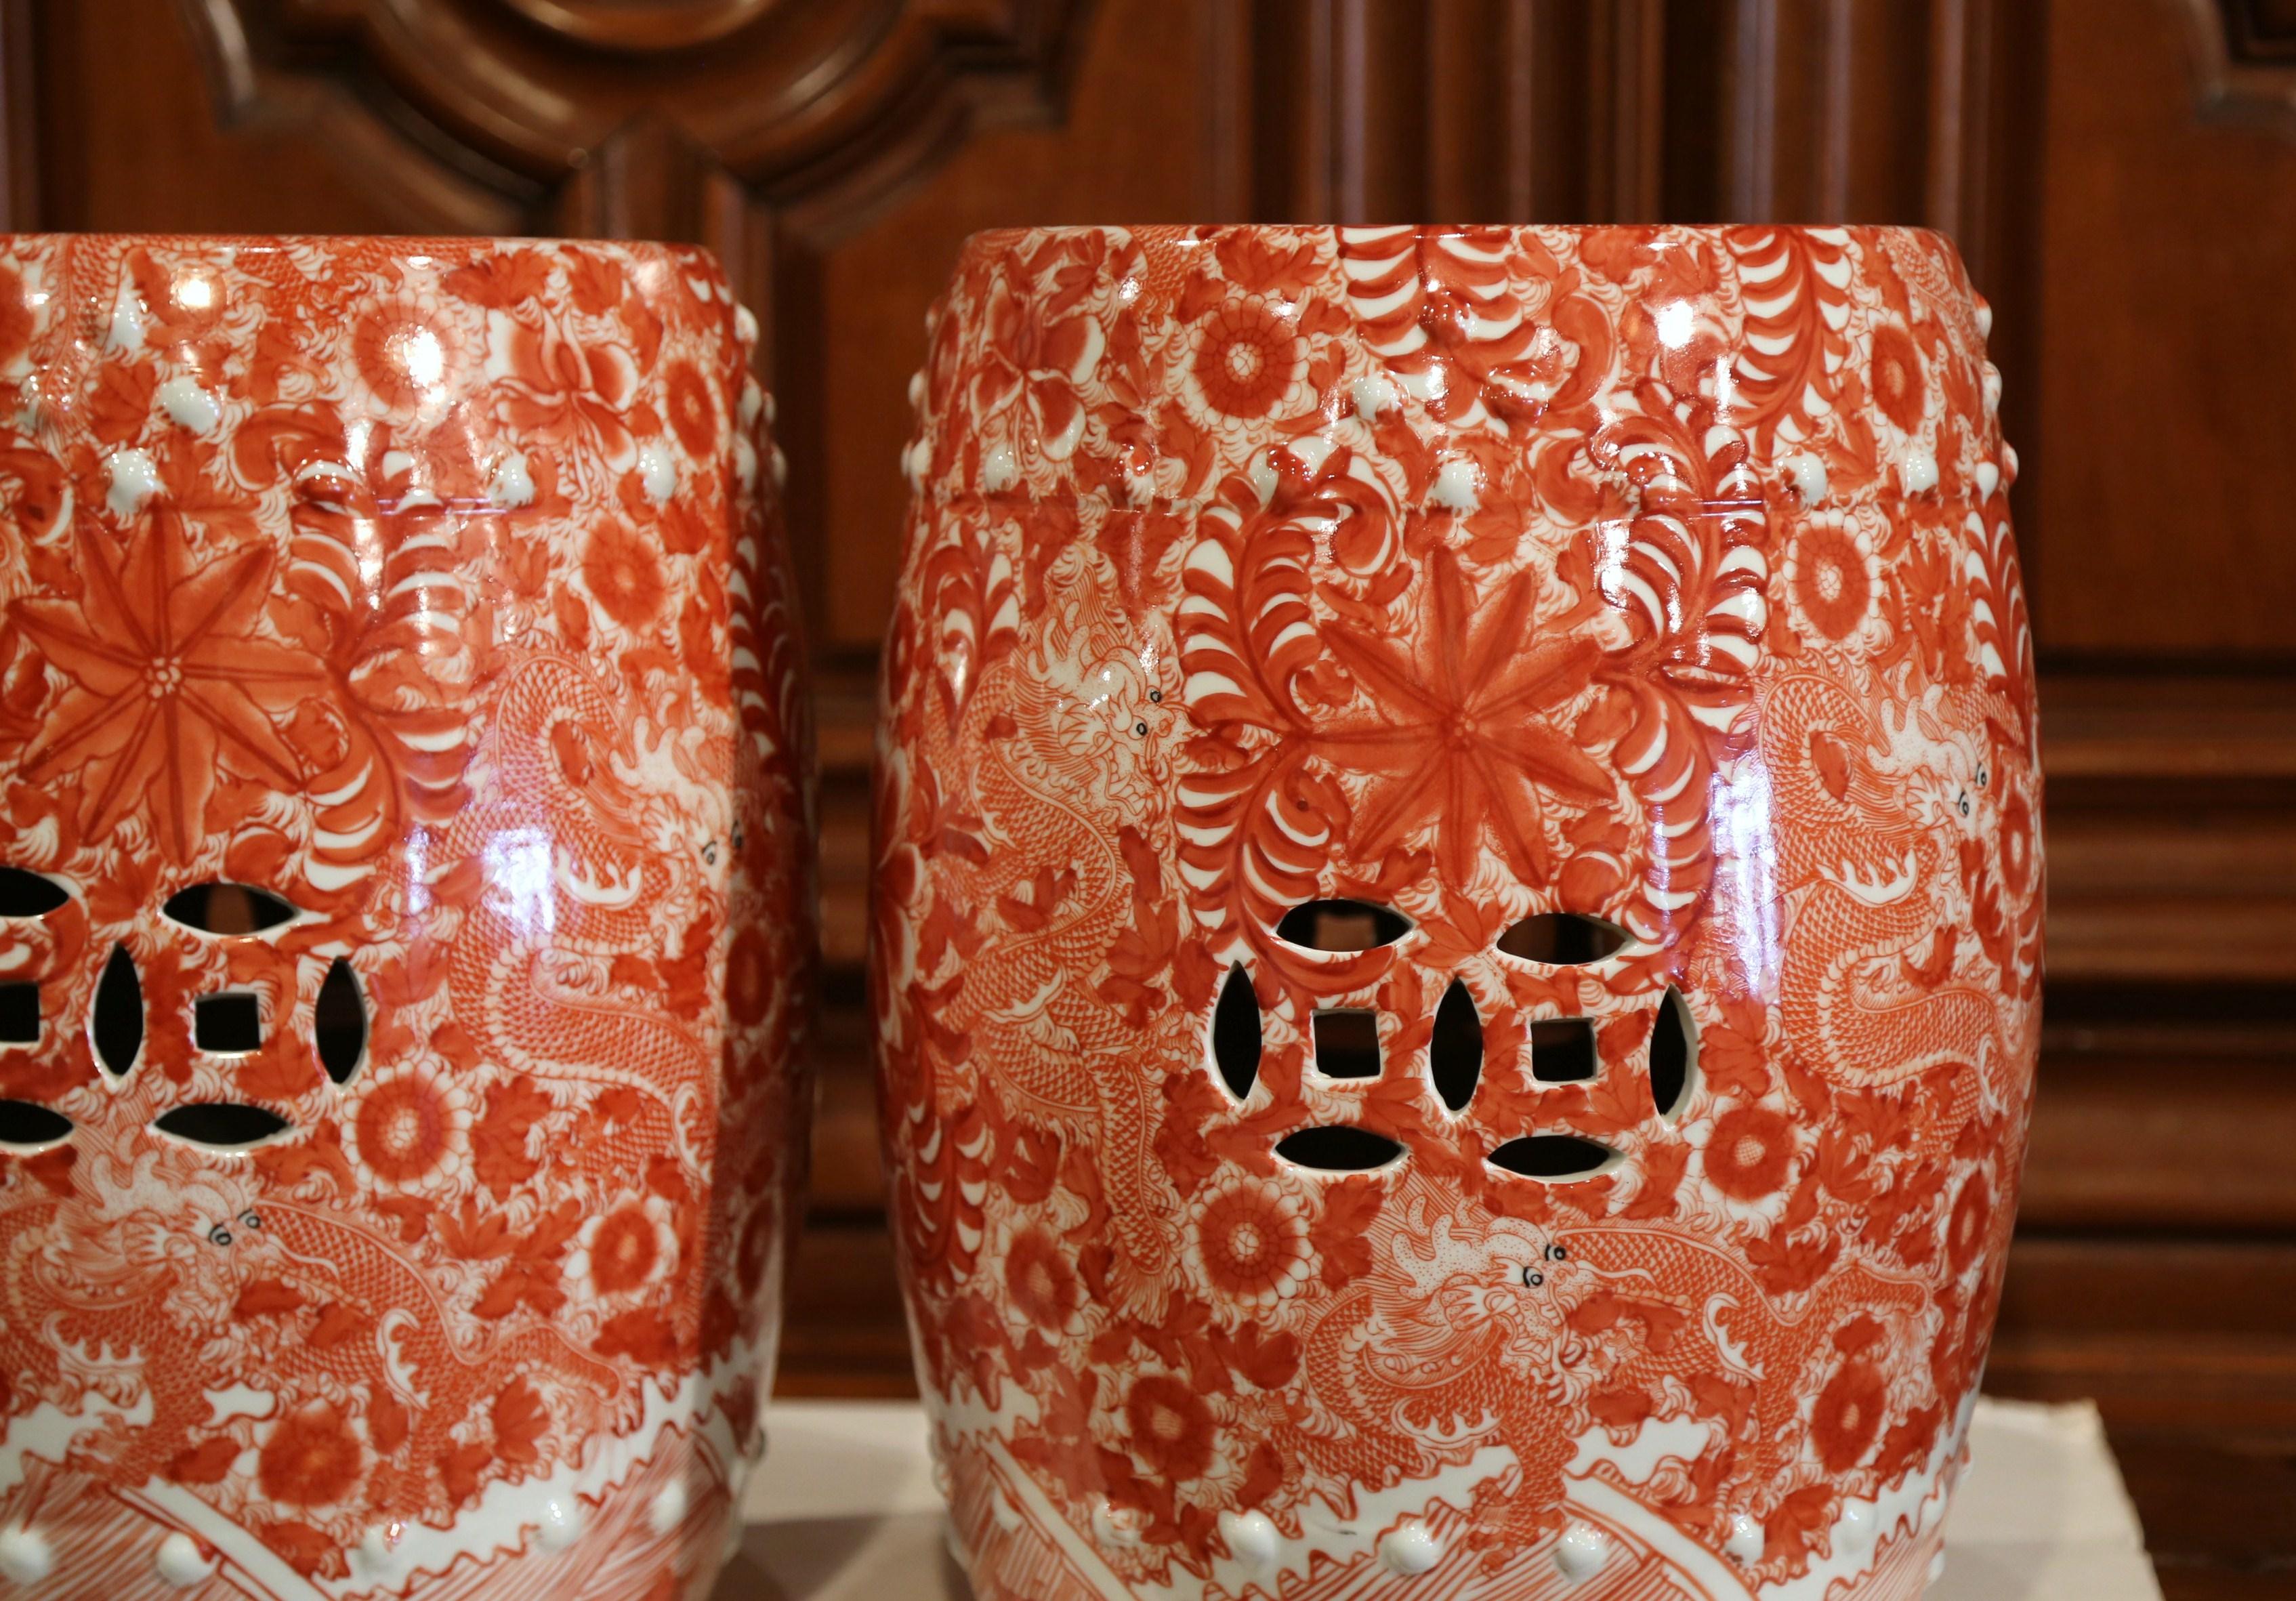 Ceramic Pair of Mid-20th Century Chinese Porcelain Garden Stools with Dragon Motif